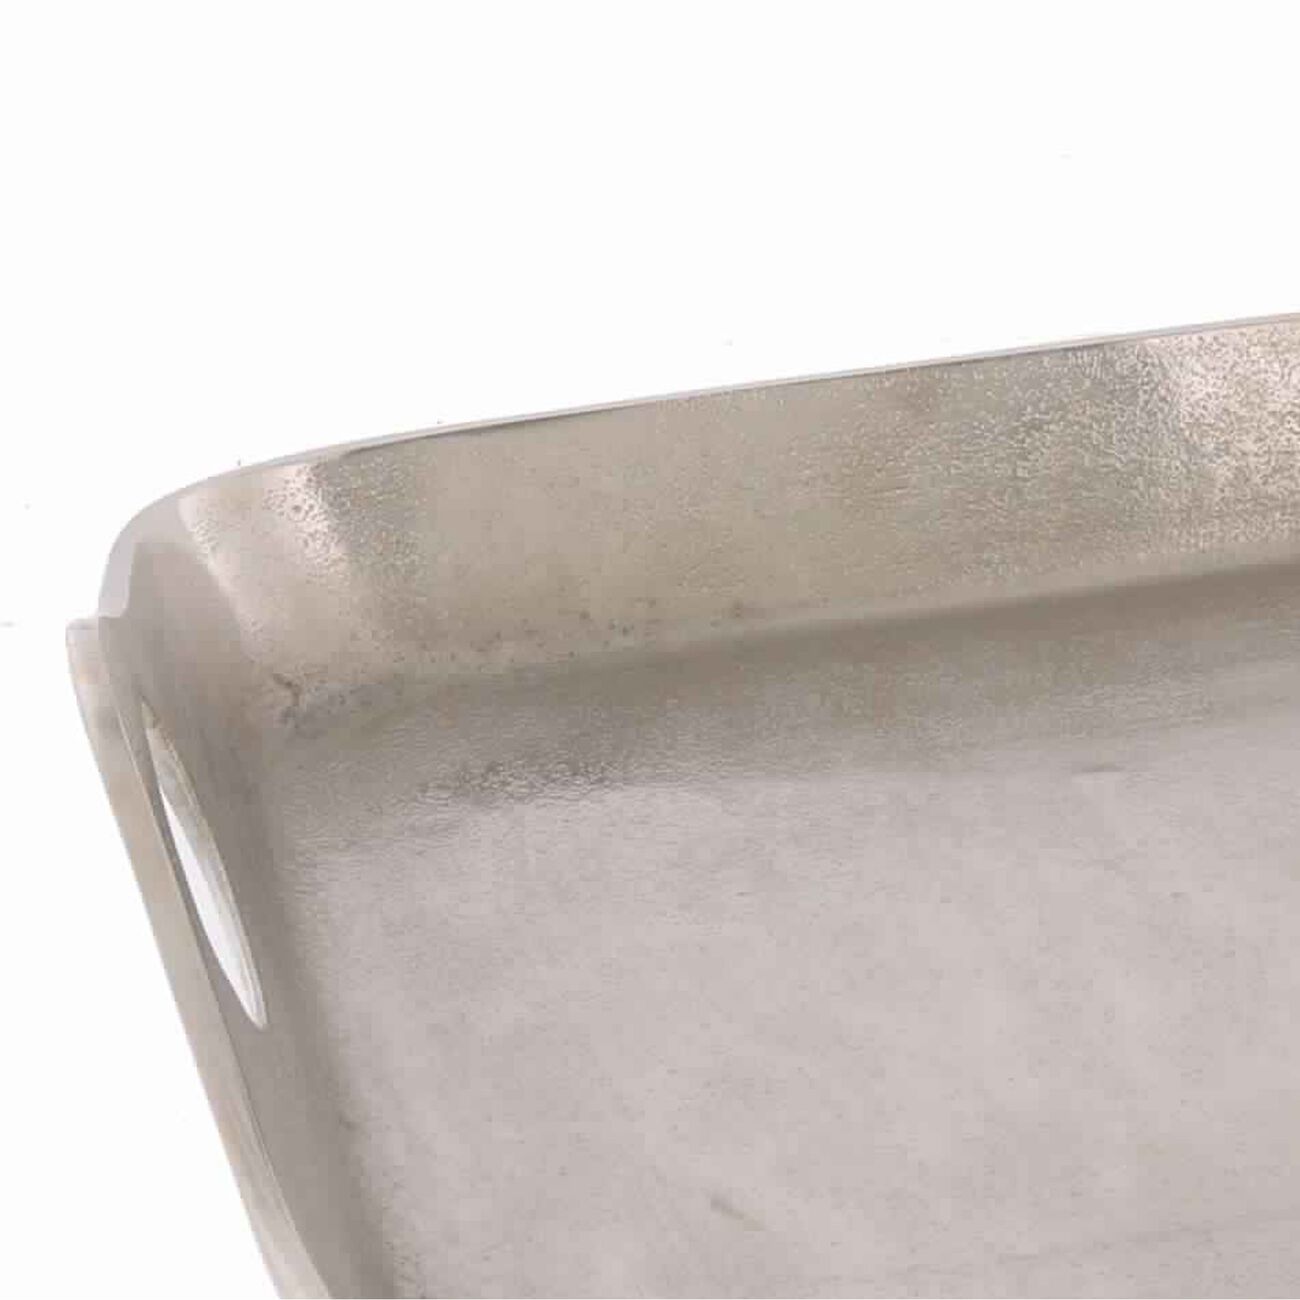 Traditional Metal Tray with Square Shaped Design and Cut-Out Handles, Silver